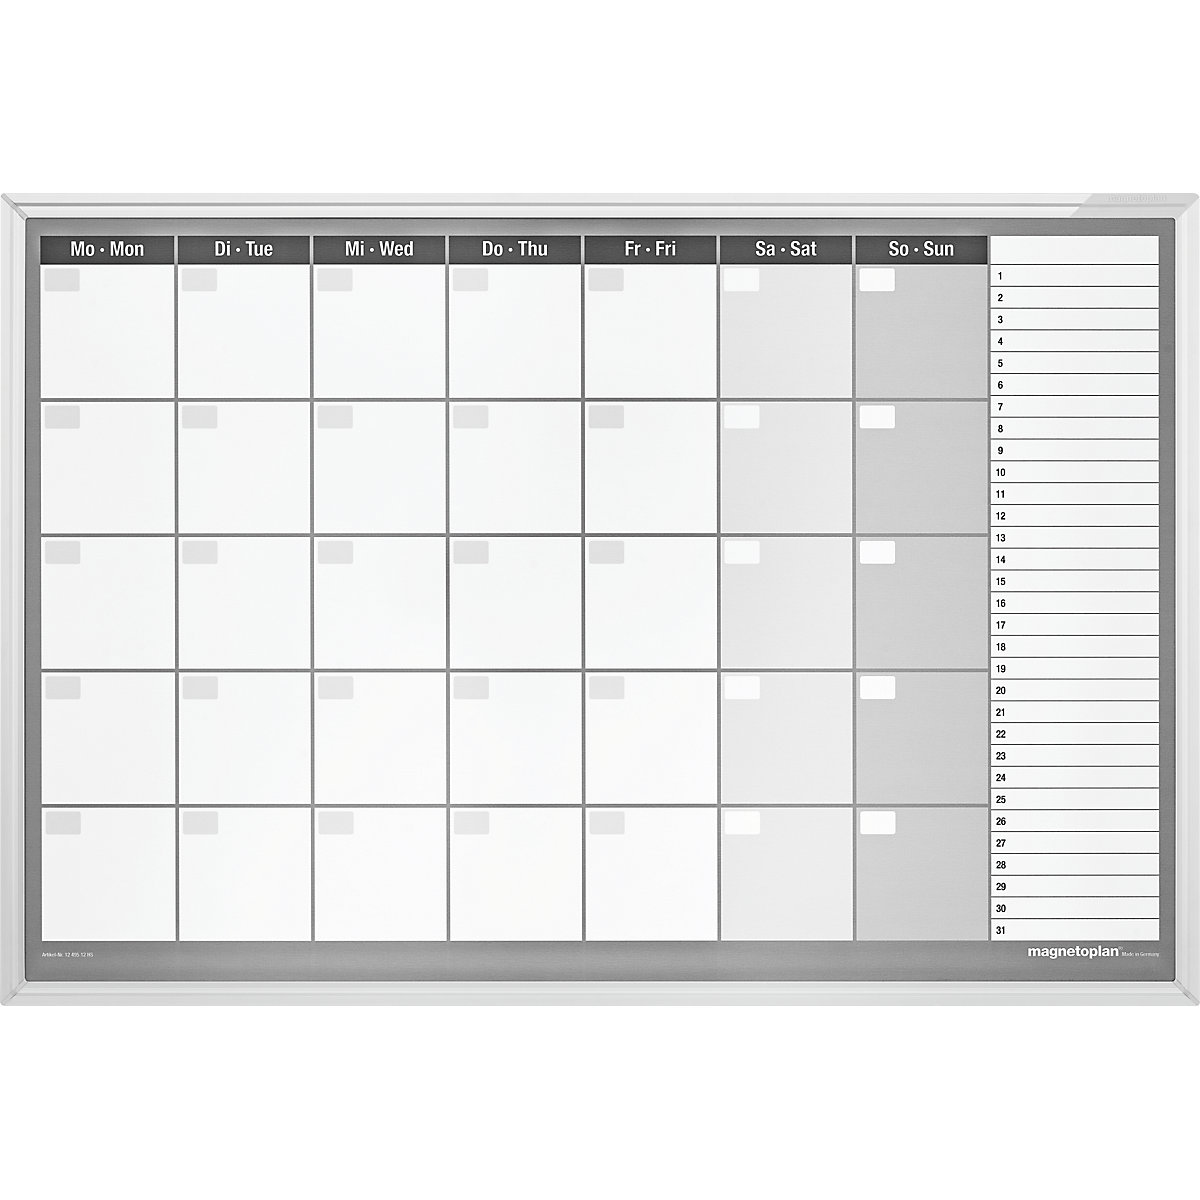 Monthly planner type CC, incl. accessories set - magnetoplan